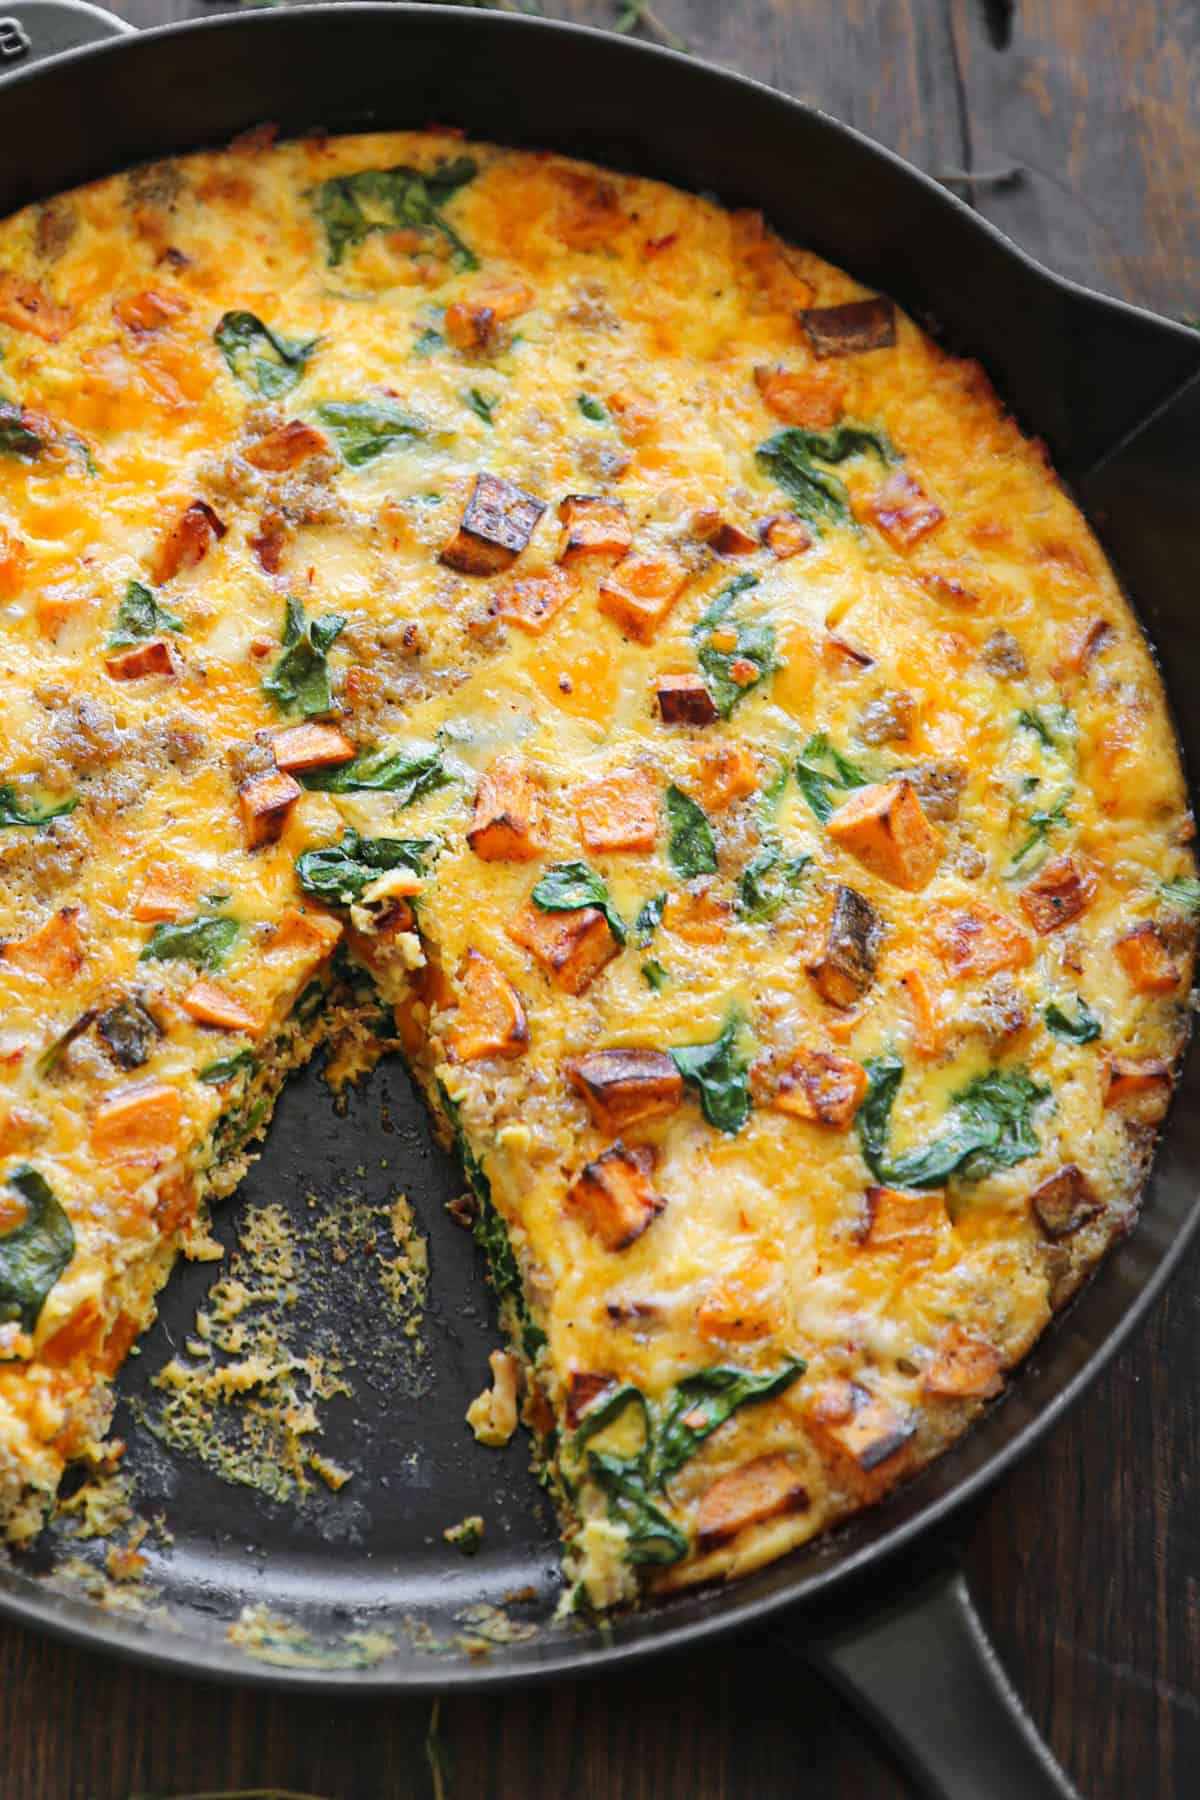 Sweet potato frittata with sausage, spinach, cheddar, and pepper jack cheese - in a cast iron skillet.